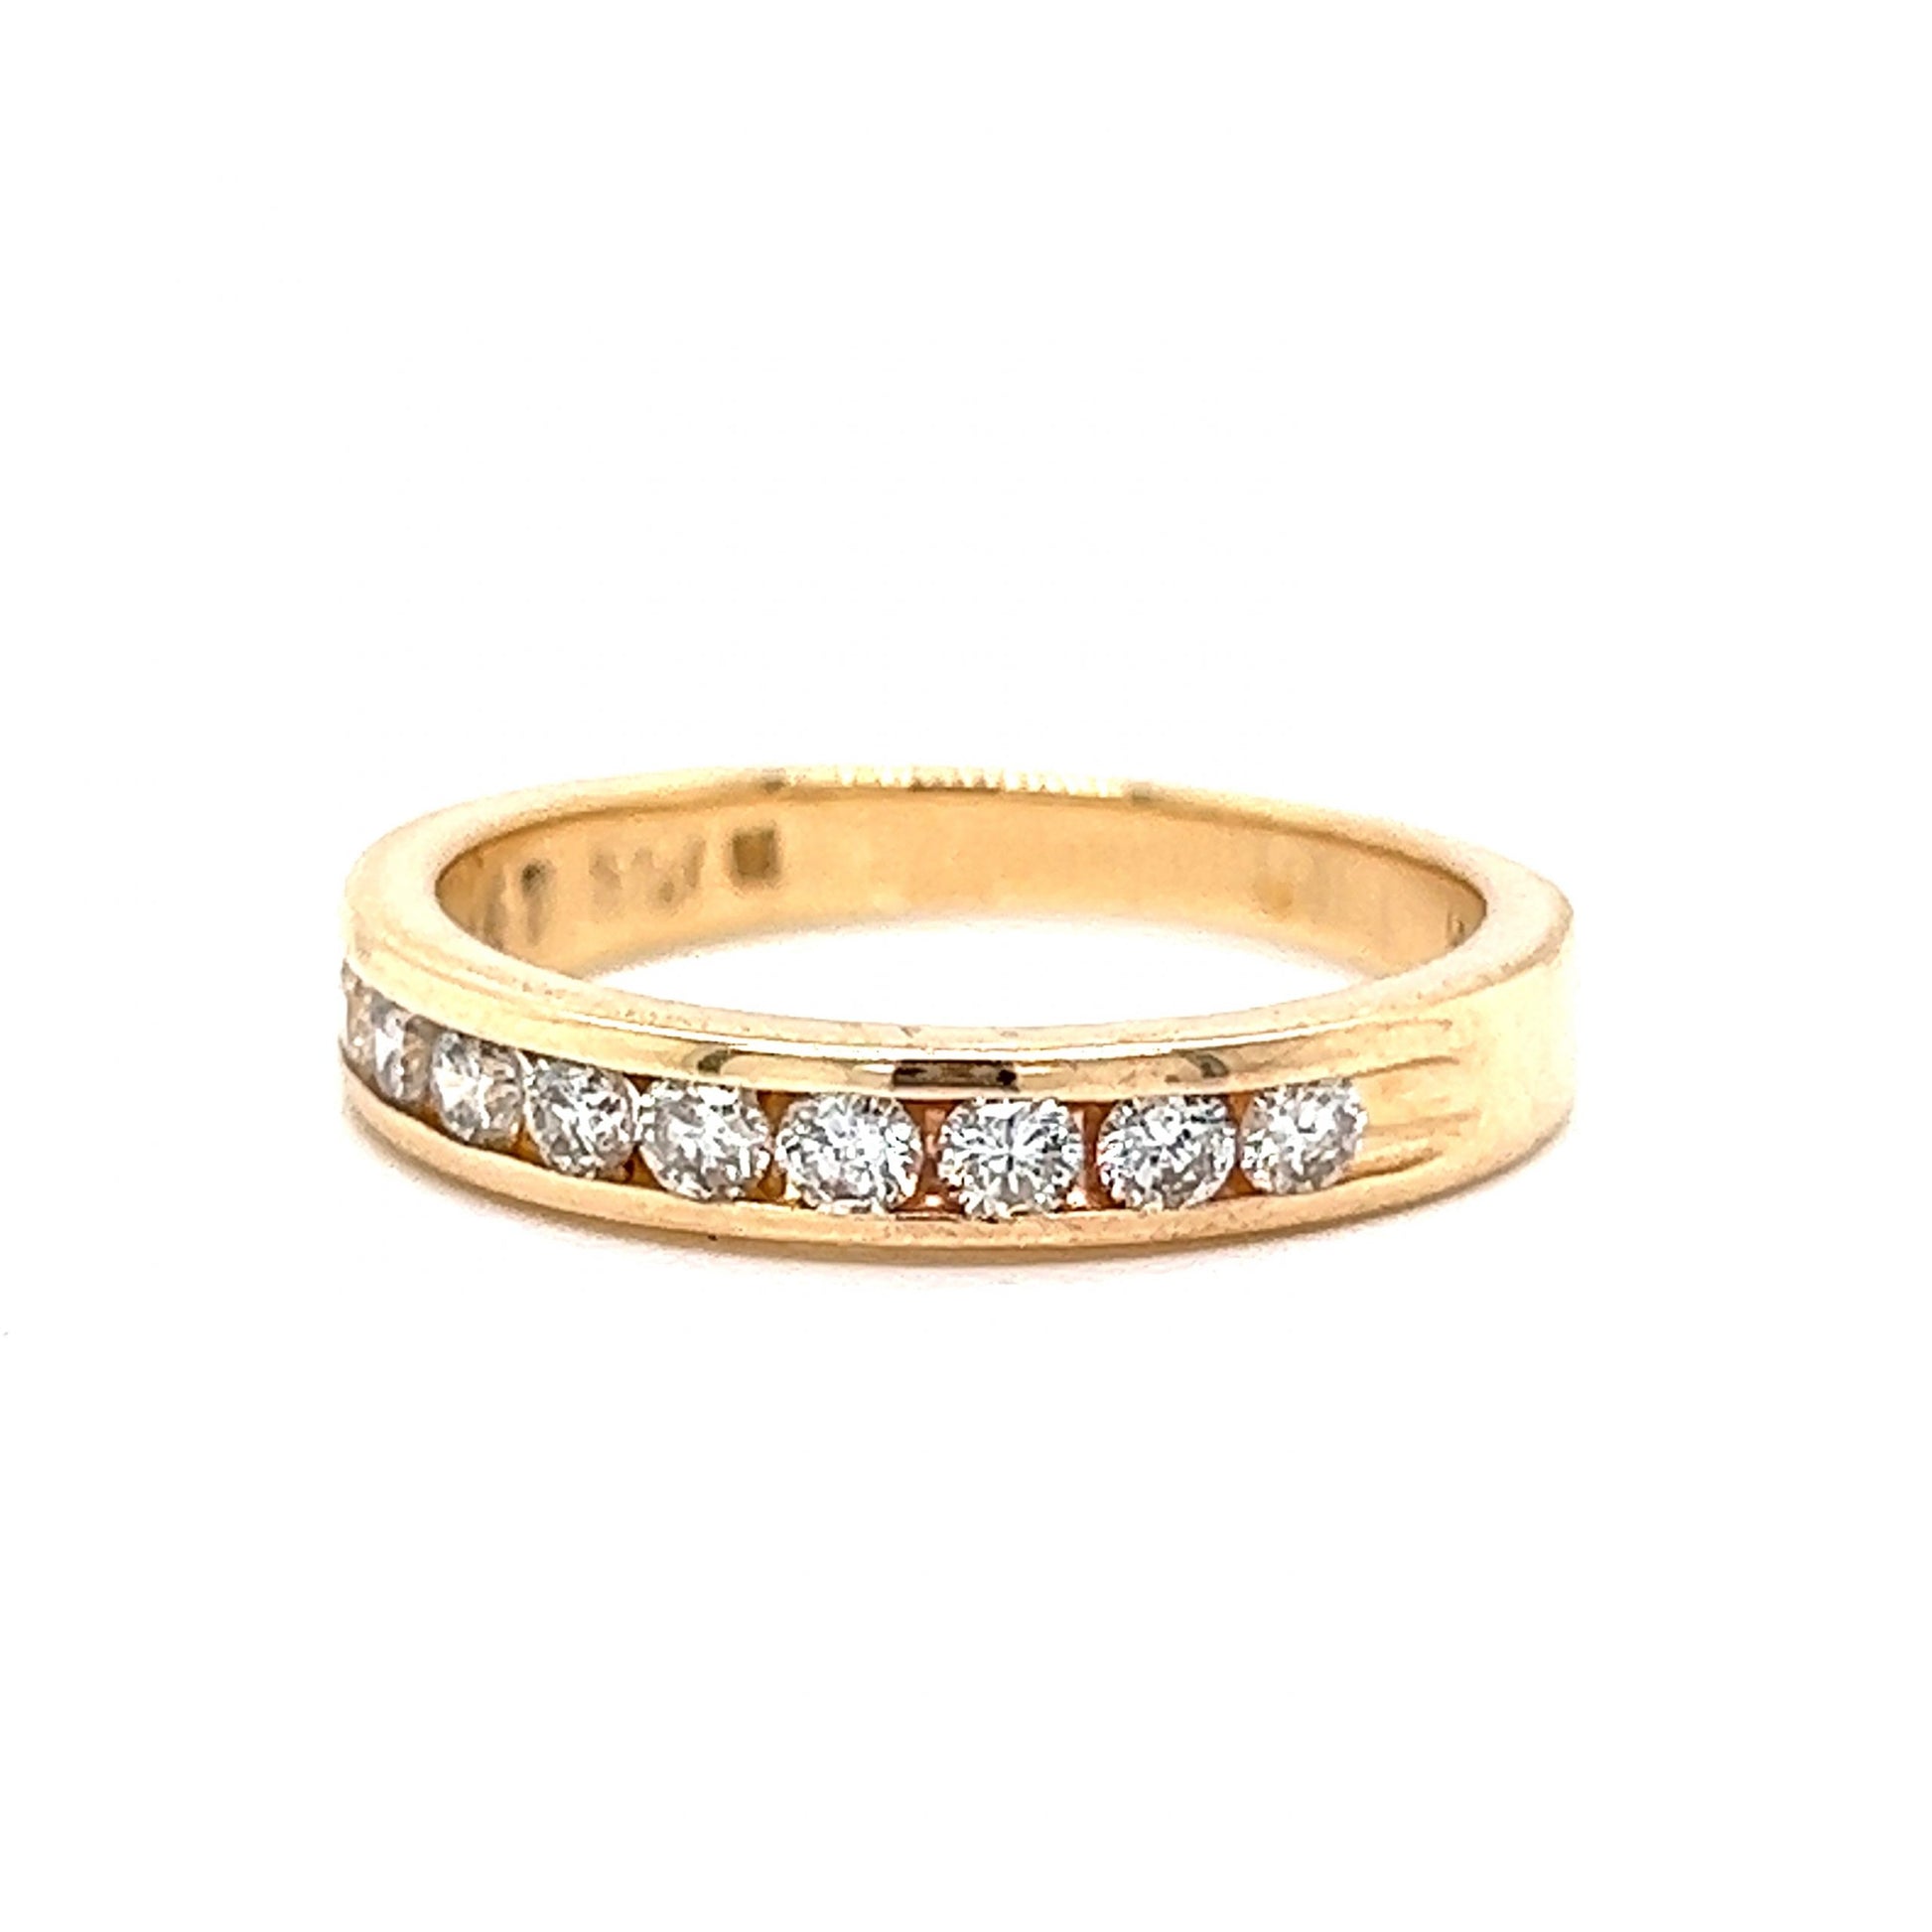 .47 Channel Set Diamond Wedding Band in 14k Yellow GoldComposition: 14 Karat Yellow GoldRing Size: 6.5Total Diamond Weight: .47 ctTotal Gram Weight: 3.3 gInscription: 14k .47 TWN